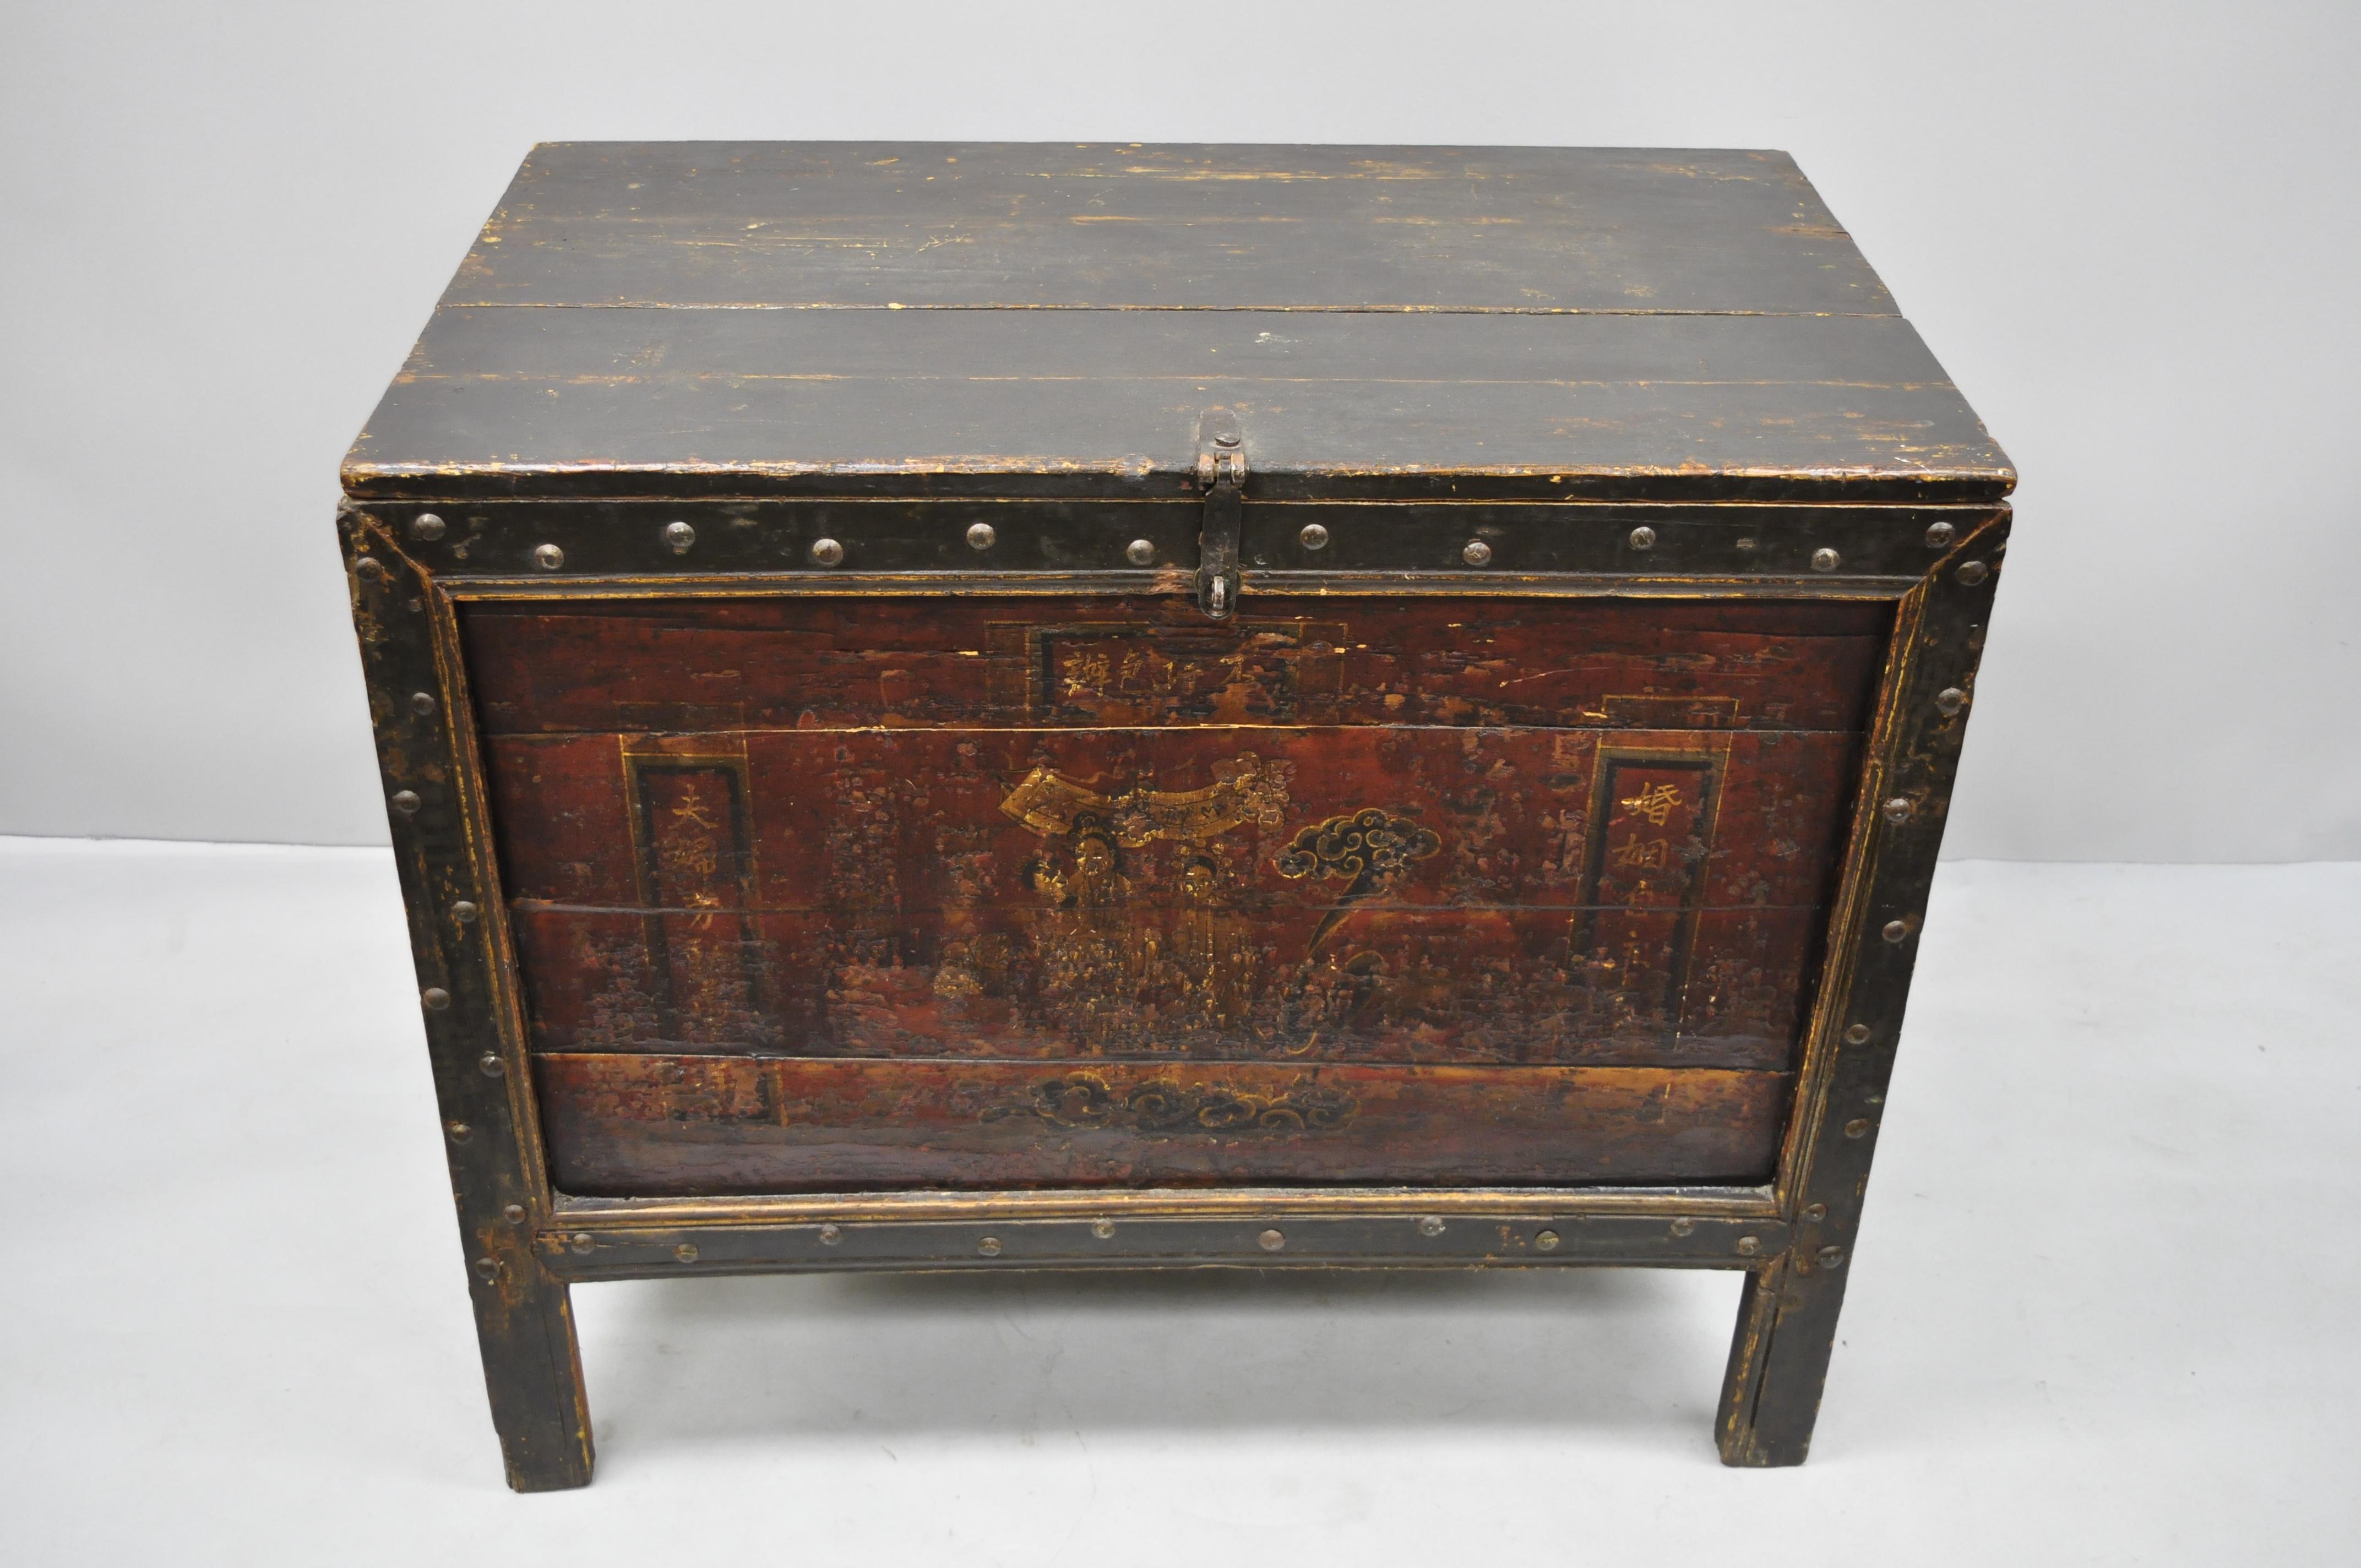 19th Century Red Lacquer Tibetan Mongolian Painted Asian Blanket Chest Grain Bin For Sale 3